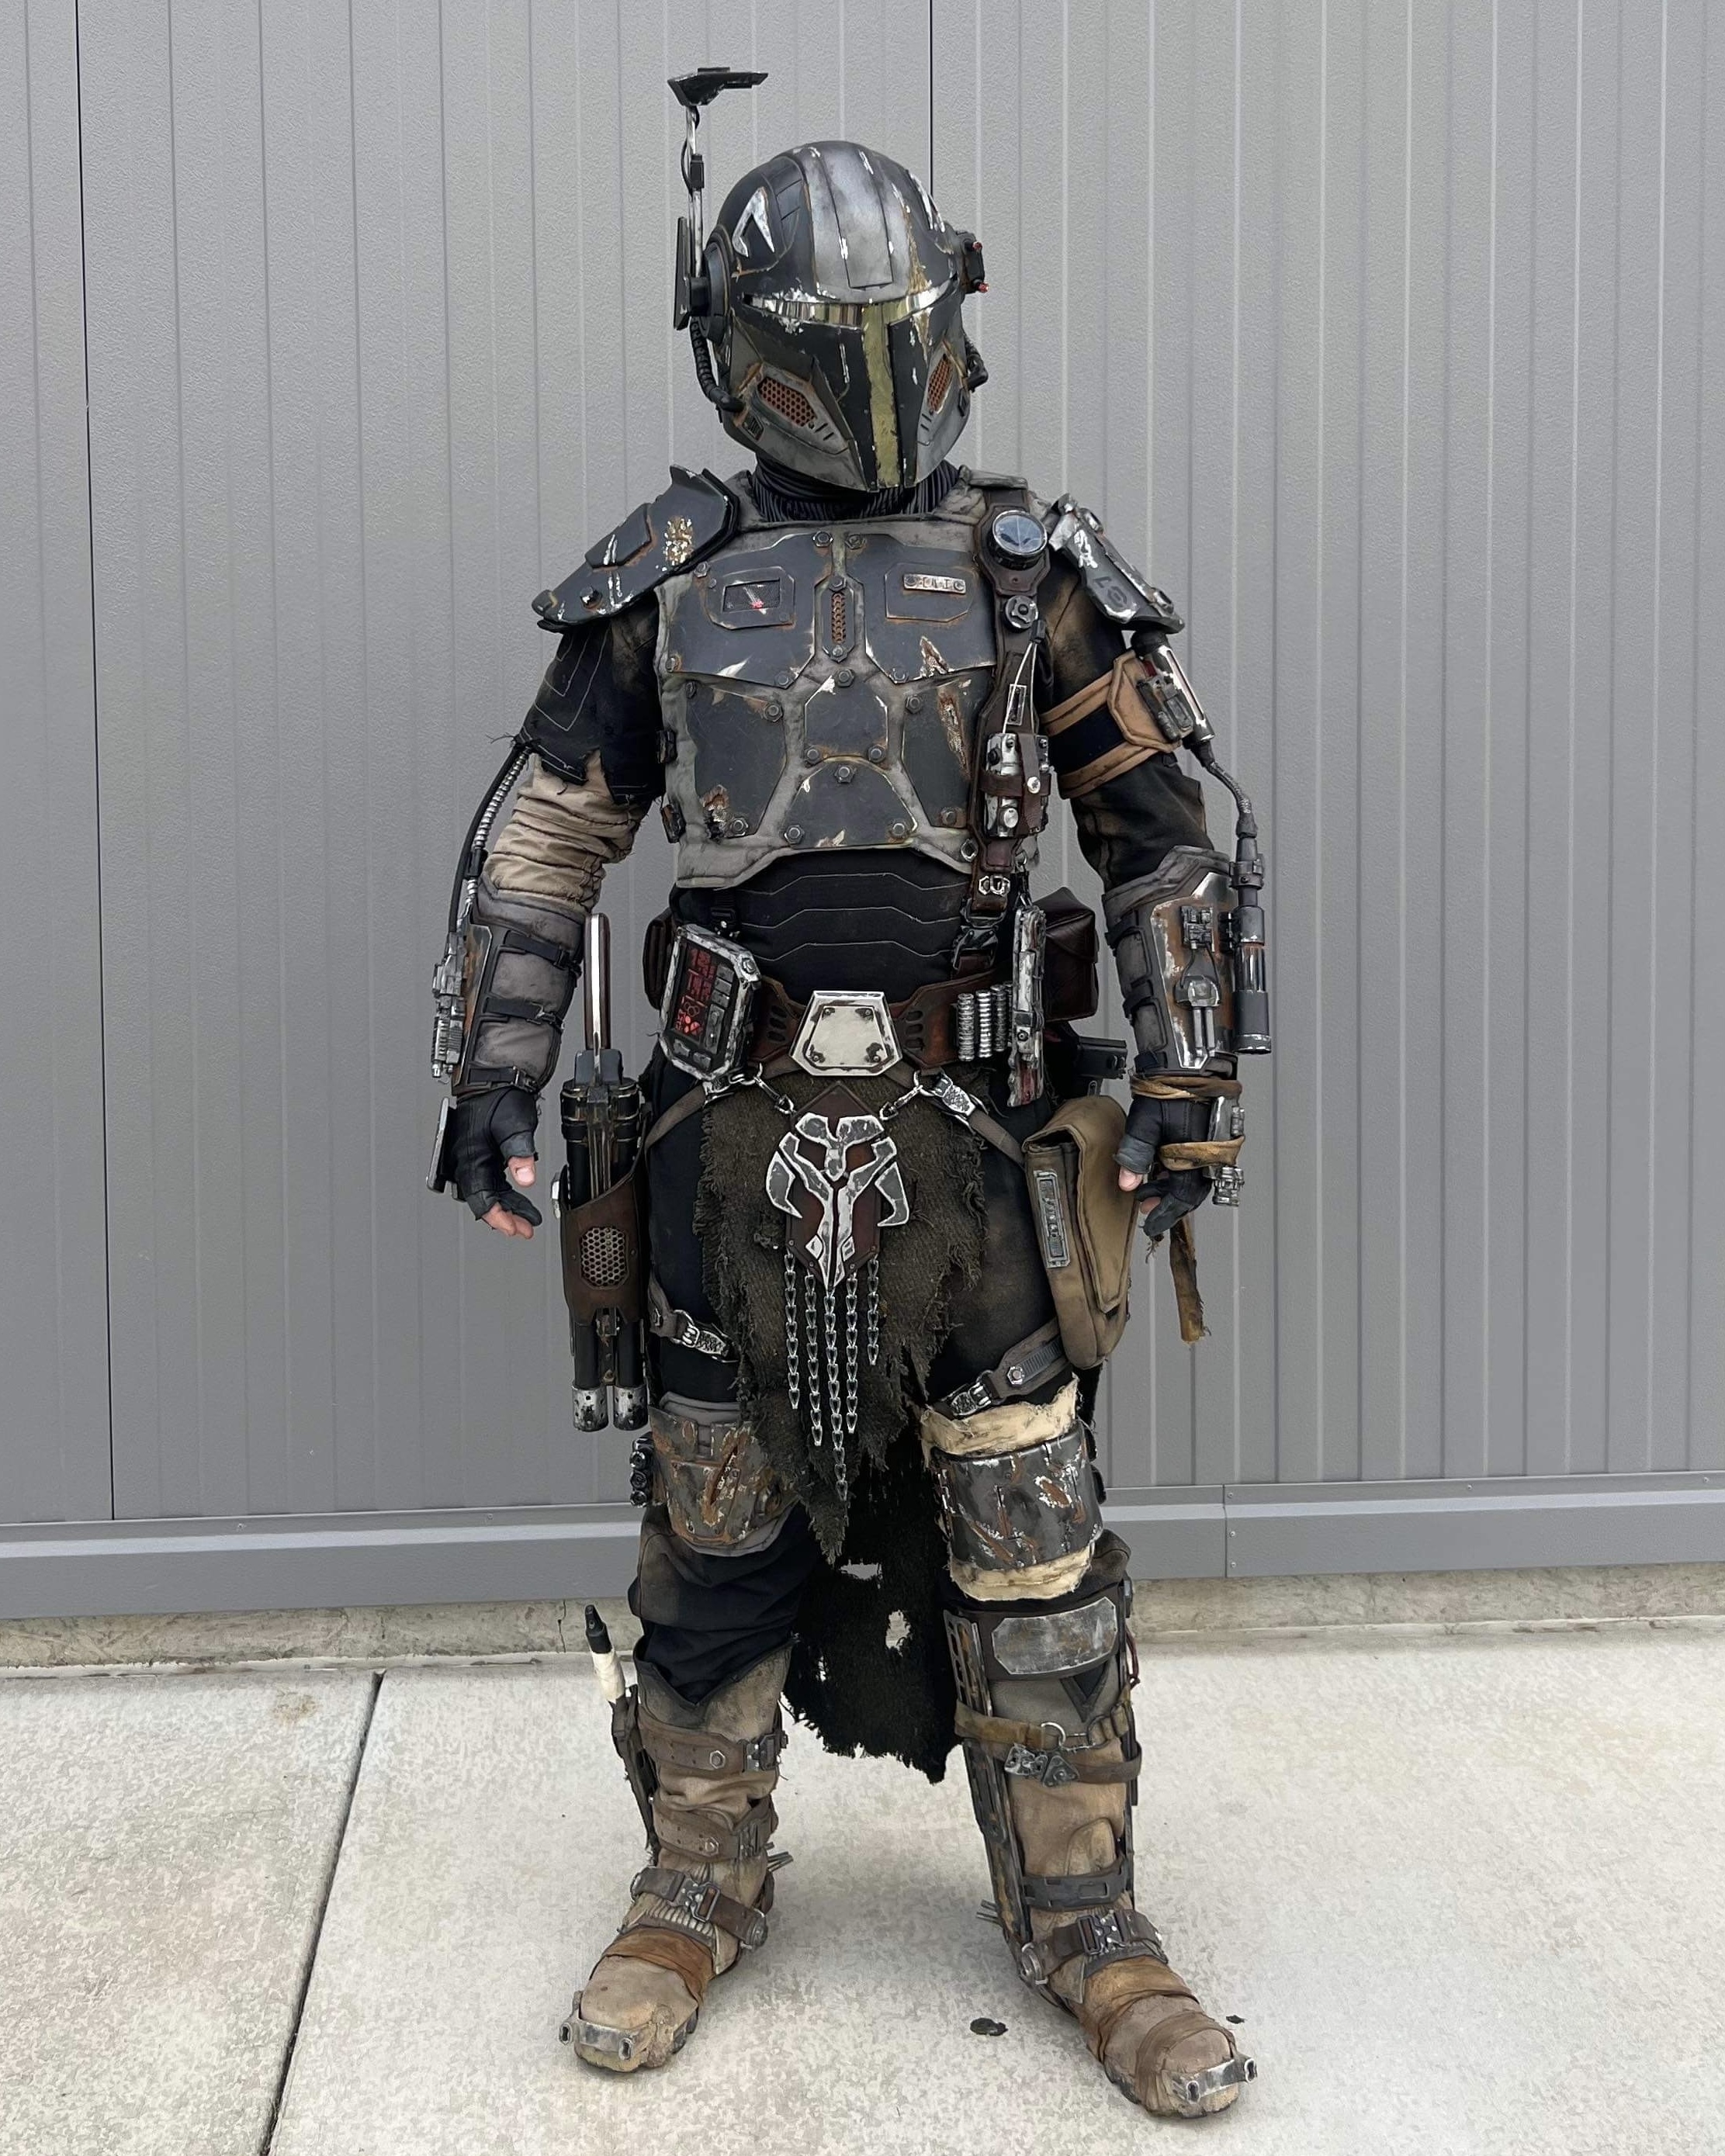 Halo' wishes it was 'The Mandalorian